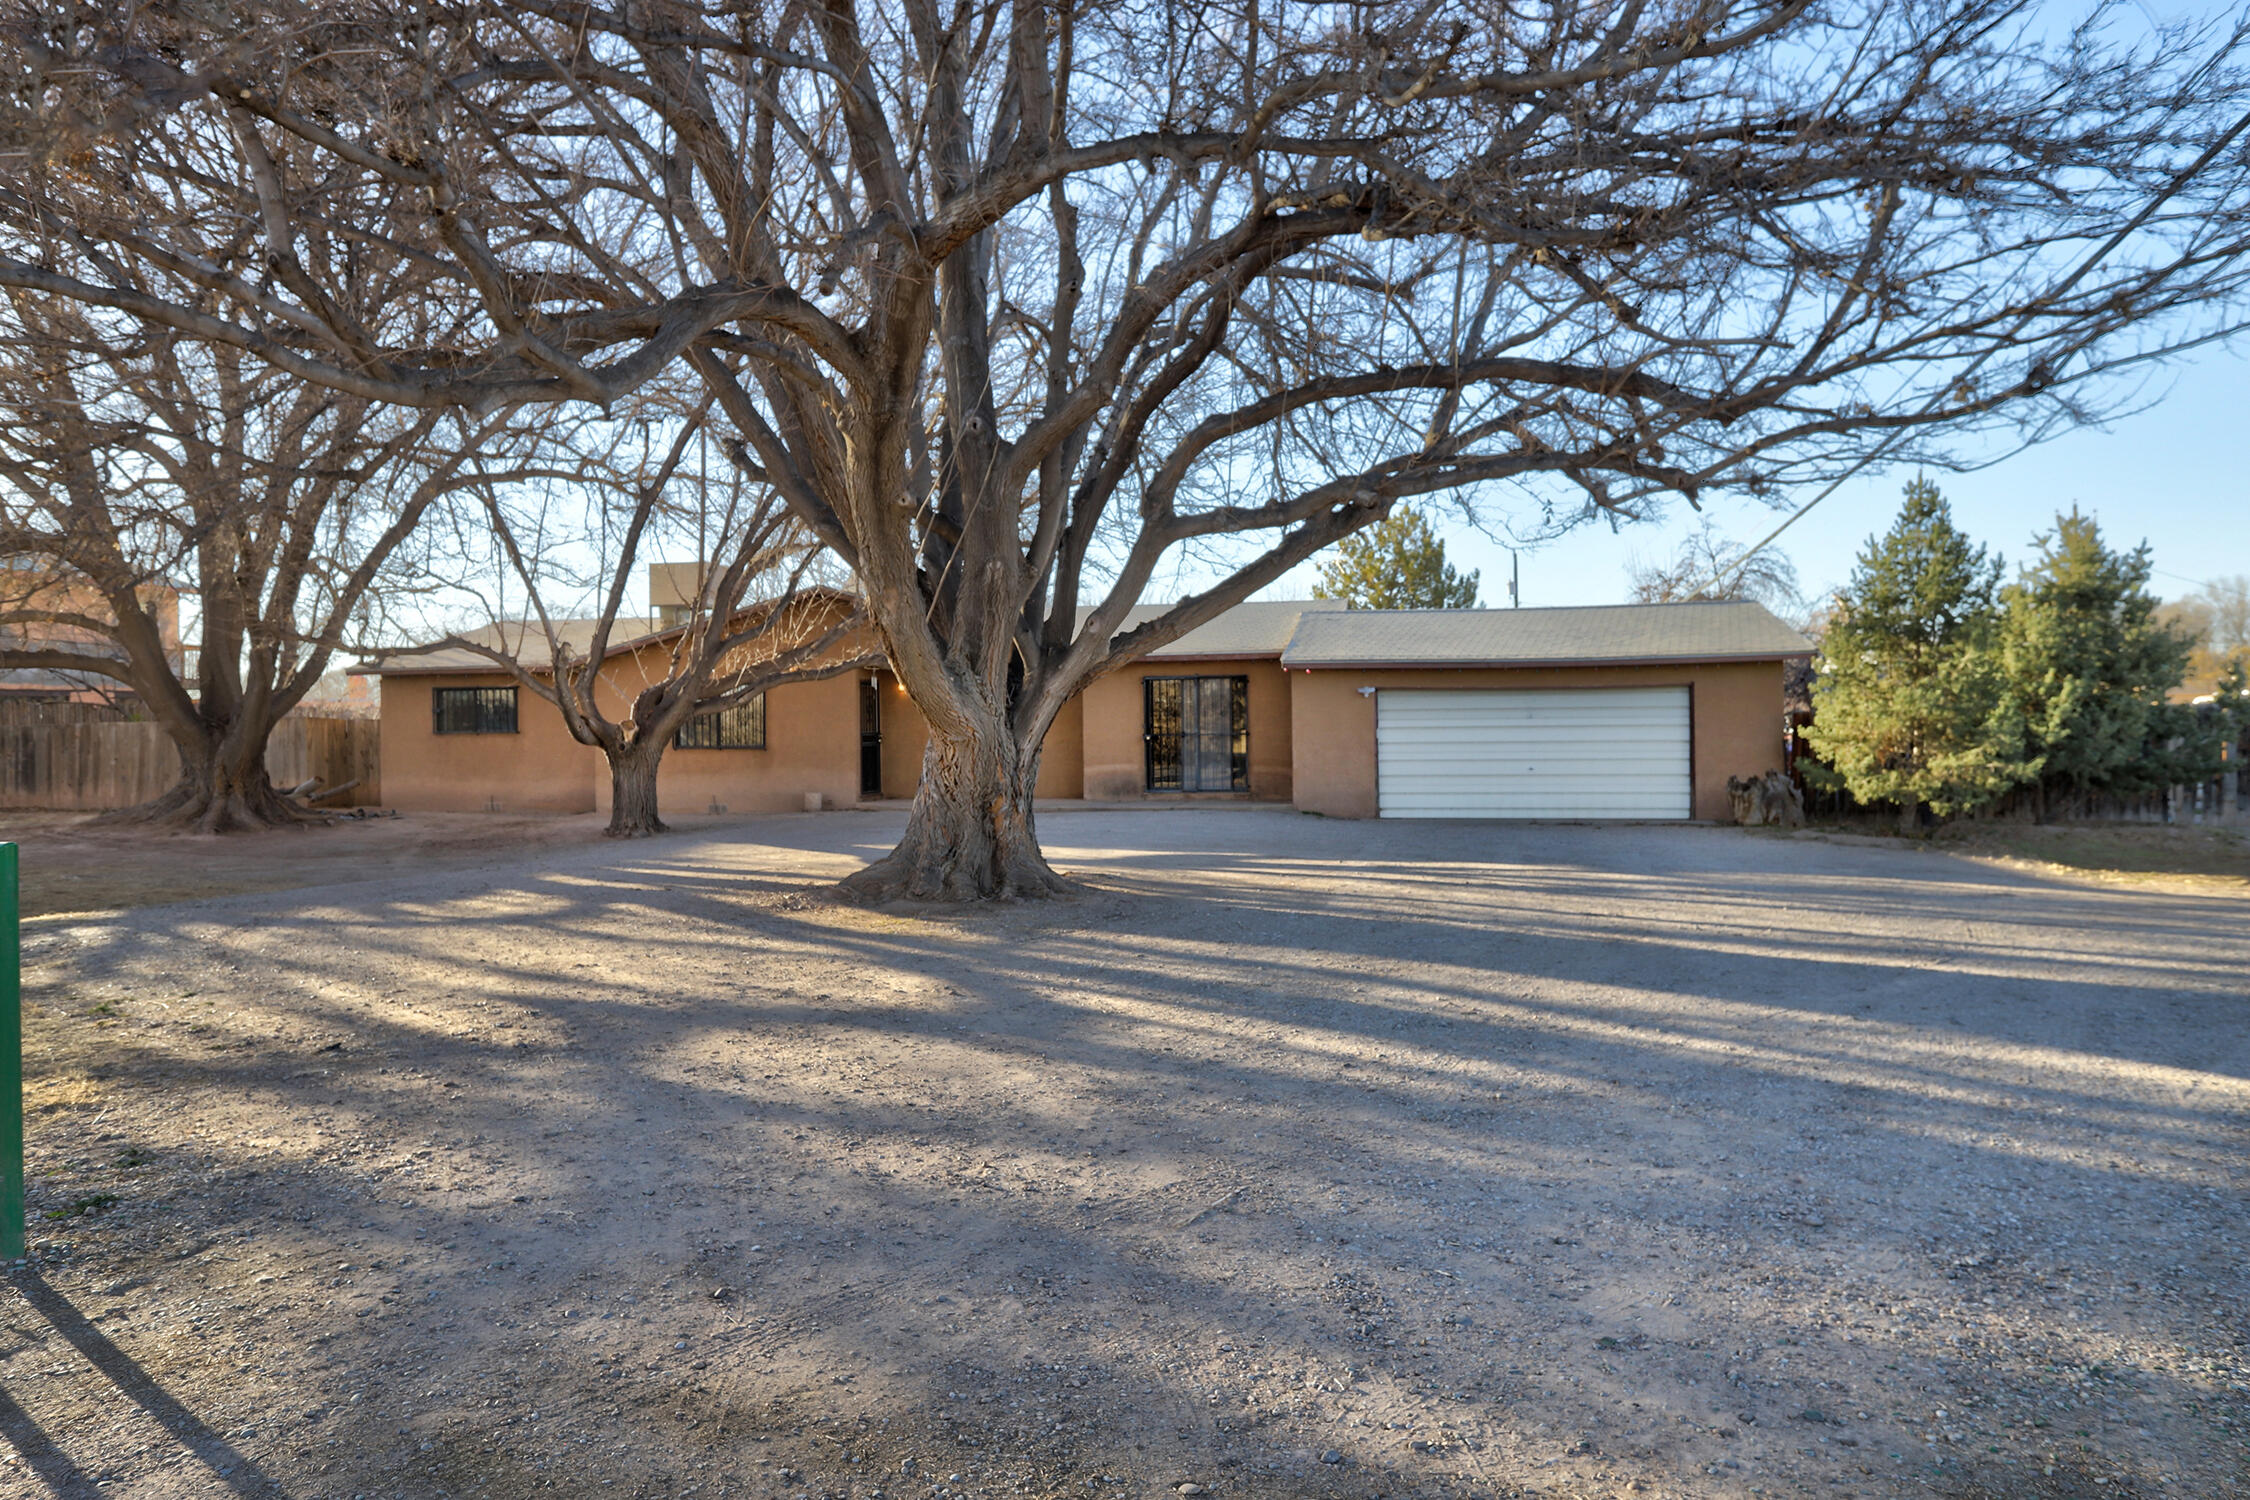 Unique opportunity in the greenbelt of Corrales!!! This property is located in the Commercial District of Corrales, has pre 1907 water rights and has a 1380 square foot attached garage. Make this property a live/work property or single family home, the possibilities are endless.